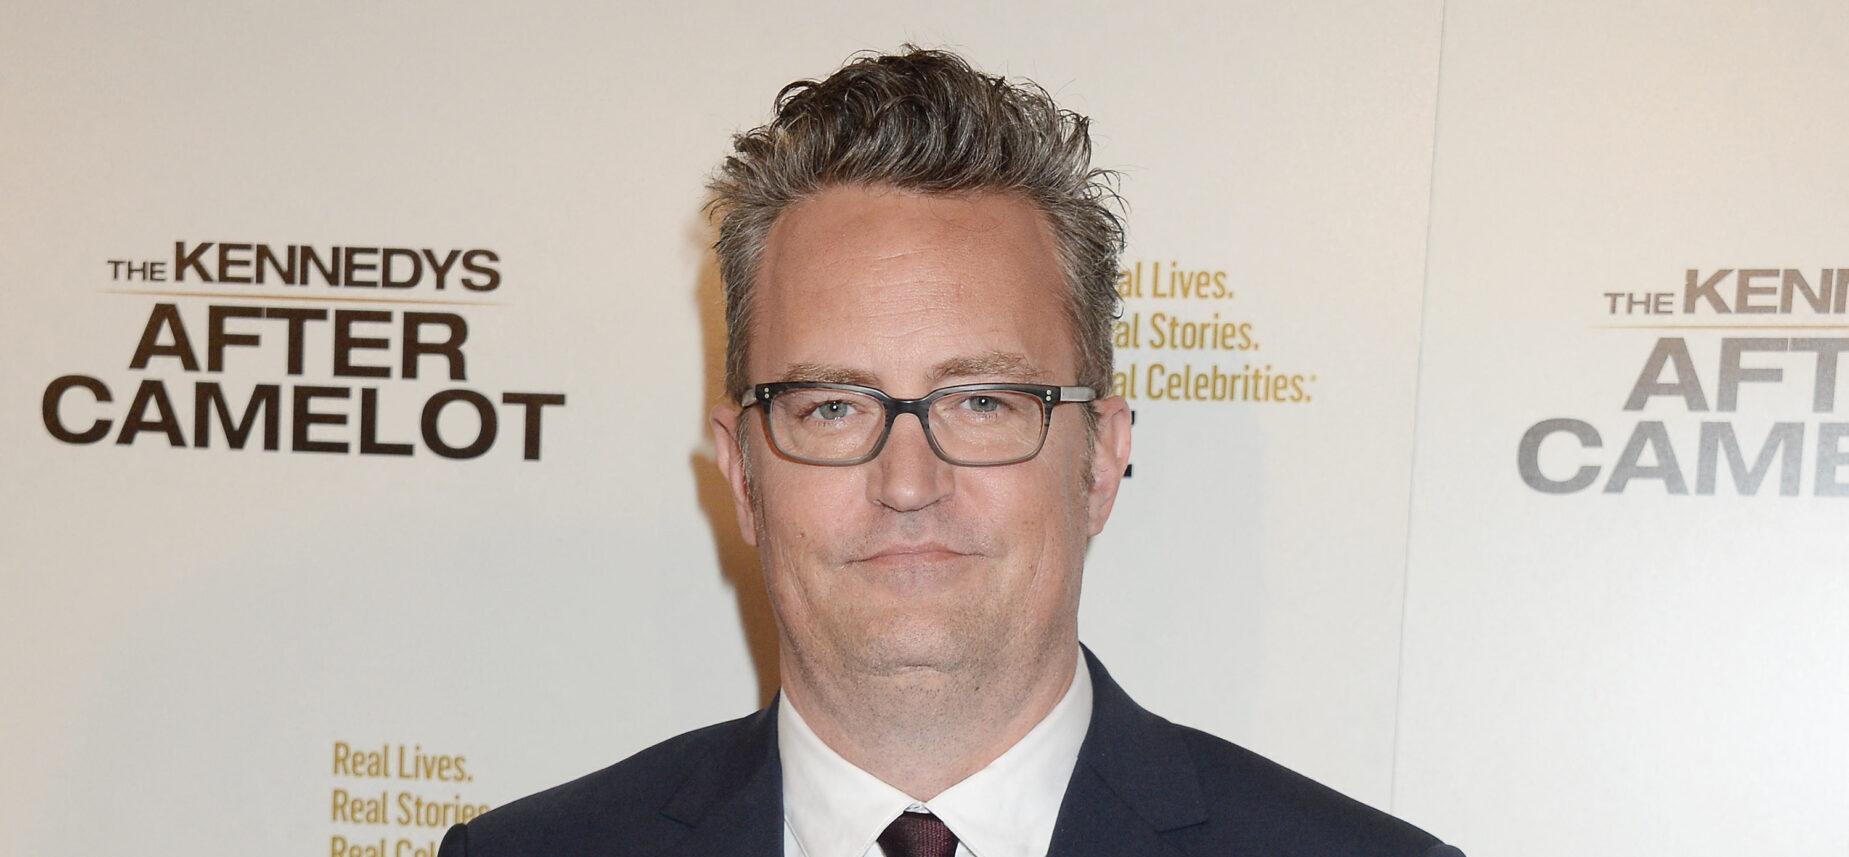 Matthew Perry’s Ex-Girlfriend Claims He ‘Had A Thing With Water’ When ‘Doing Drugs’